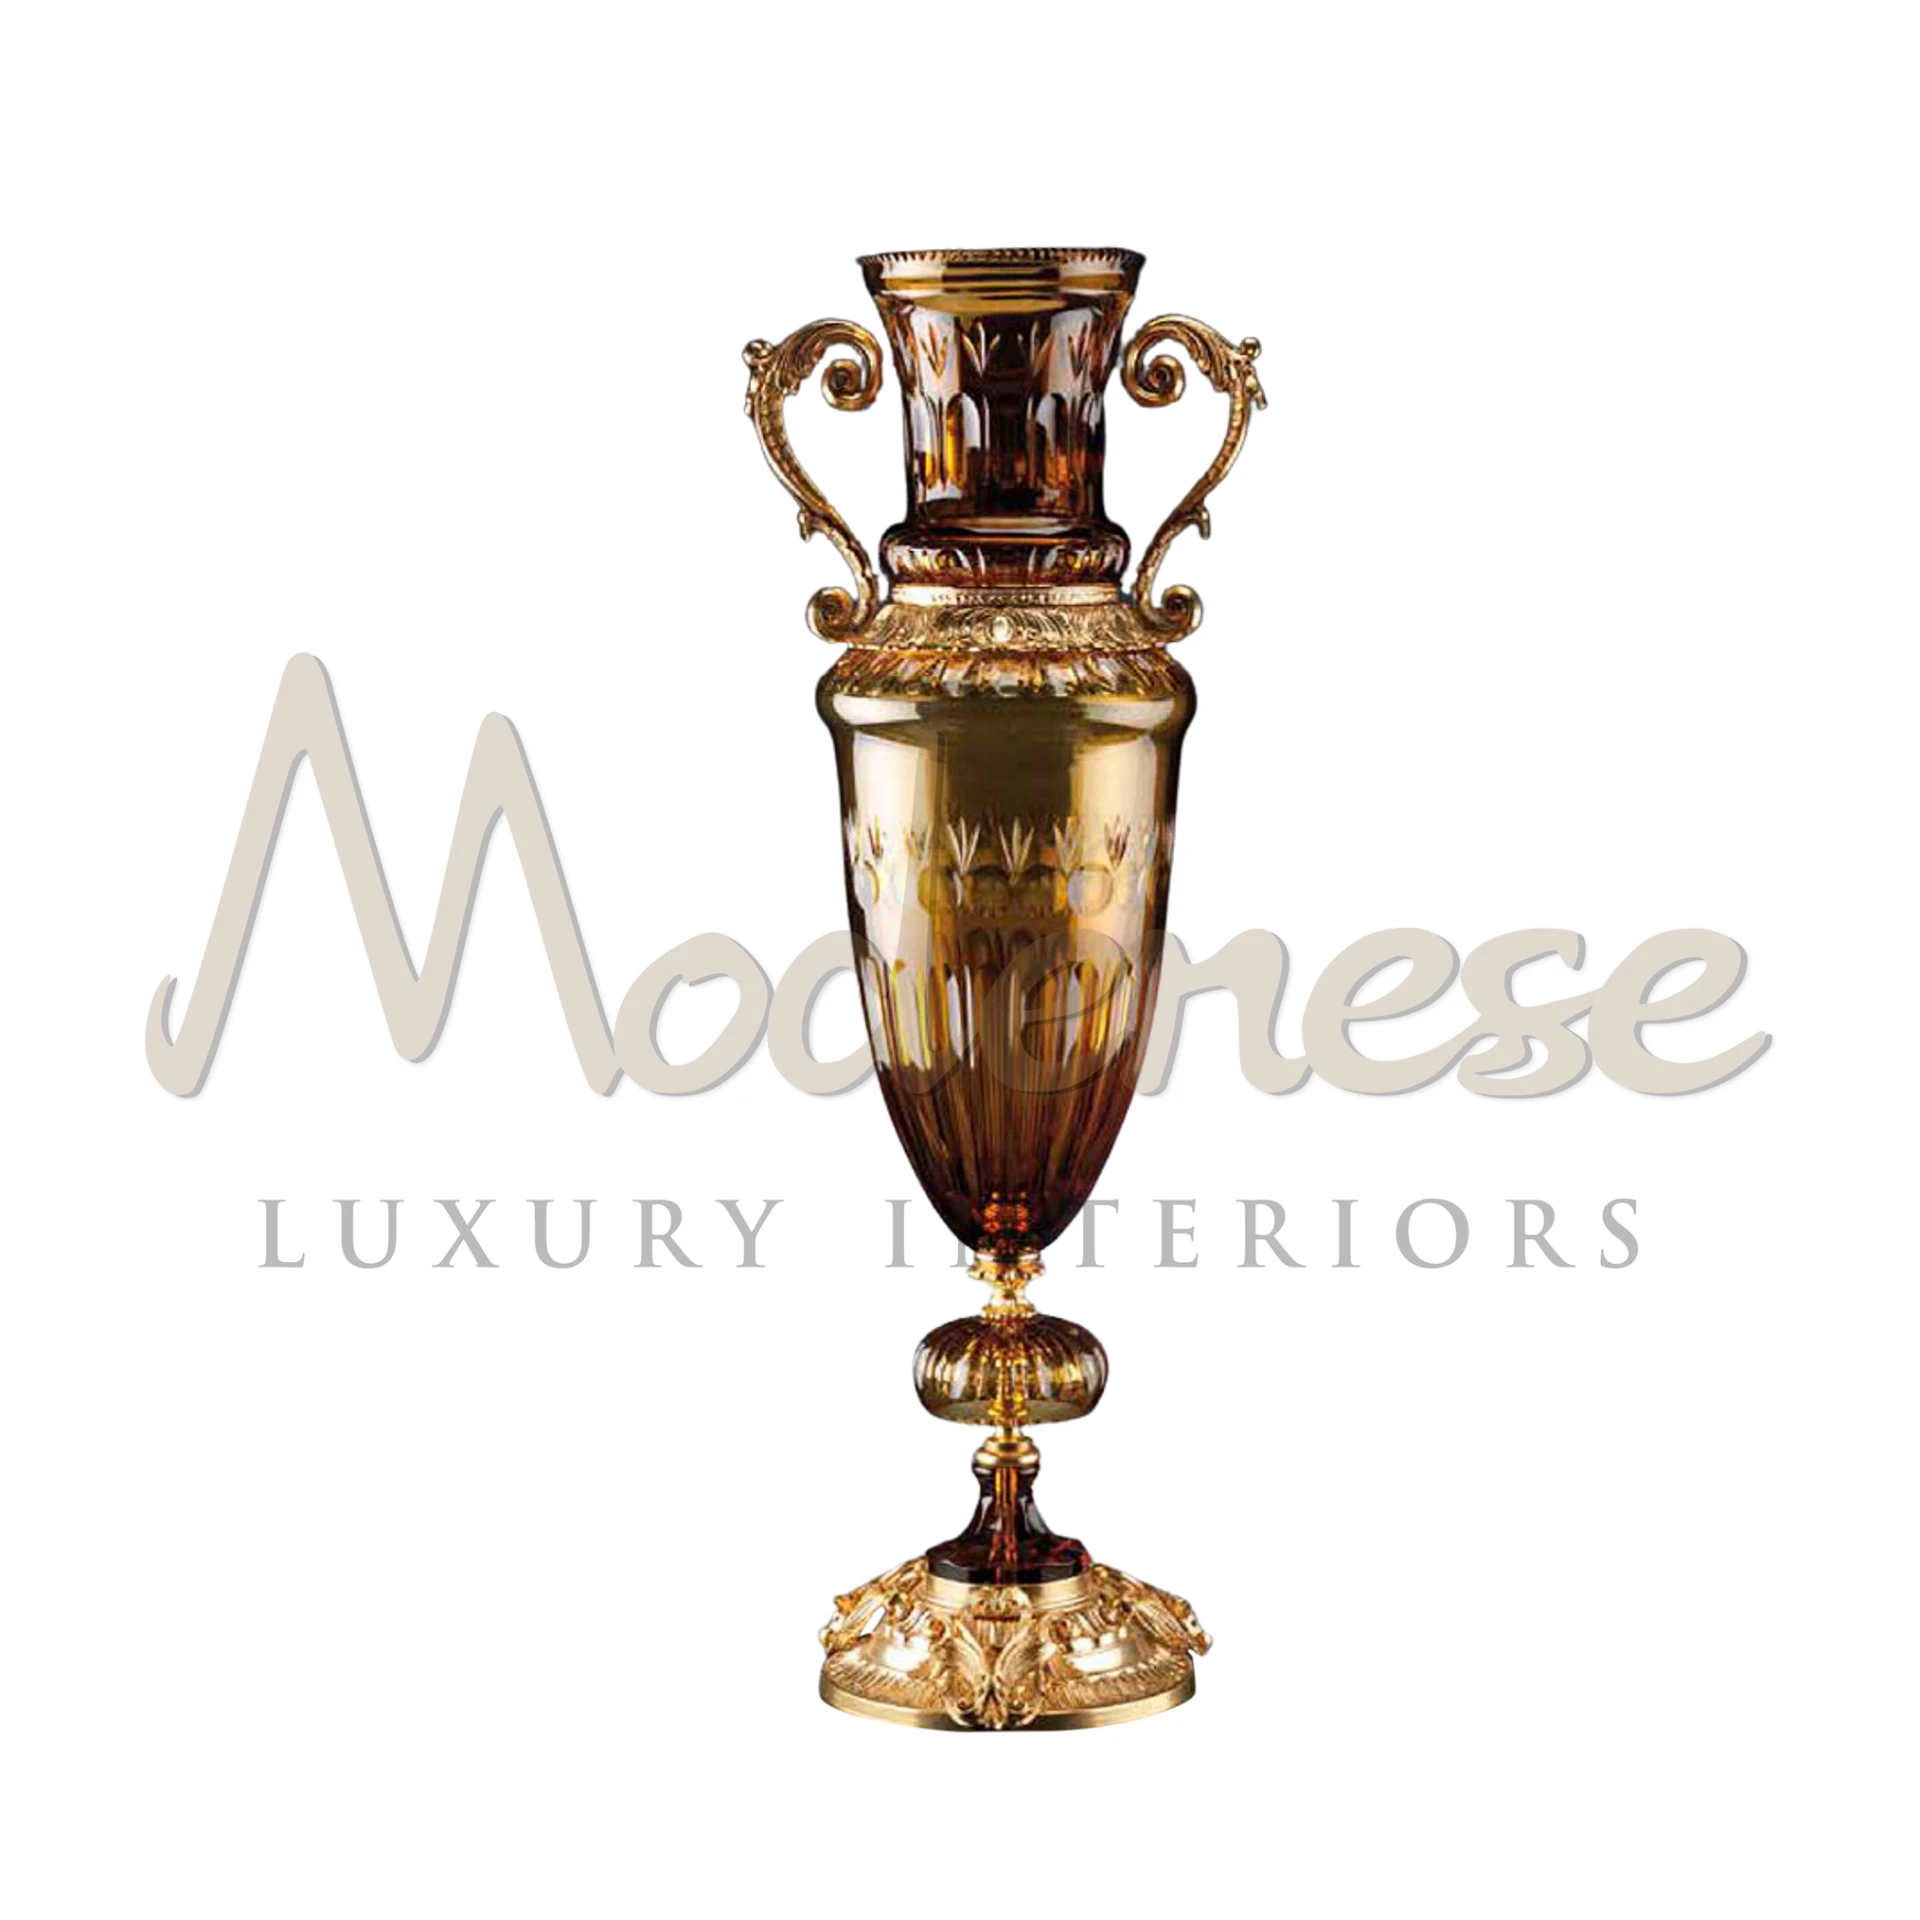 Modenese Victorian Tall Glass Vase, showcasing elaborate and ornate design, ideal for adding a touch of opulence to luxury and classic interiors.






